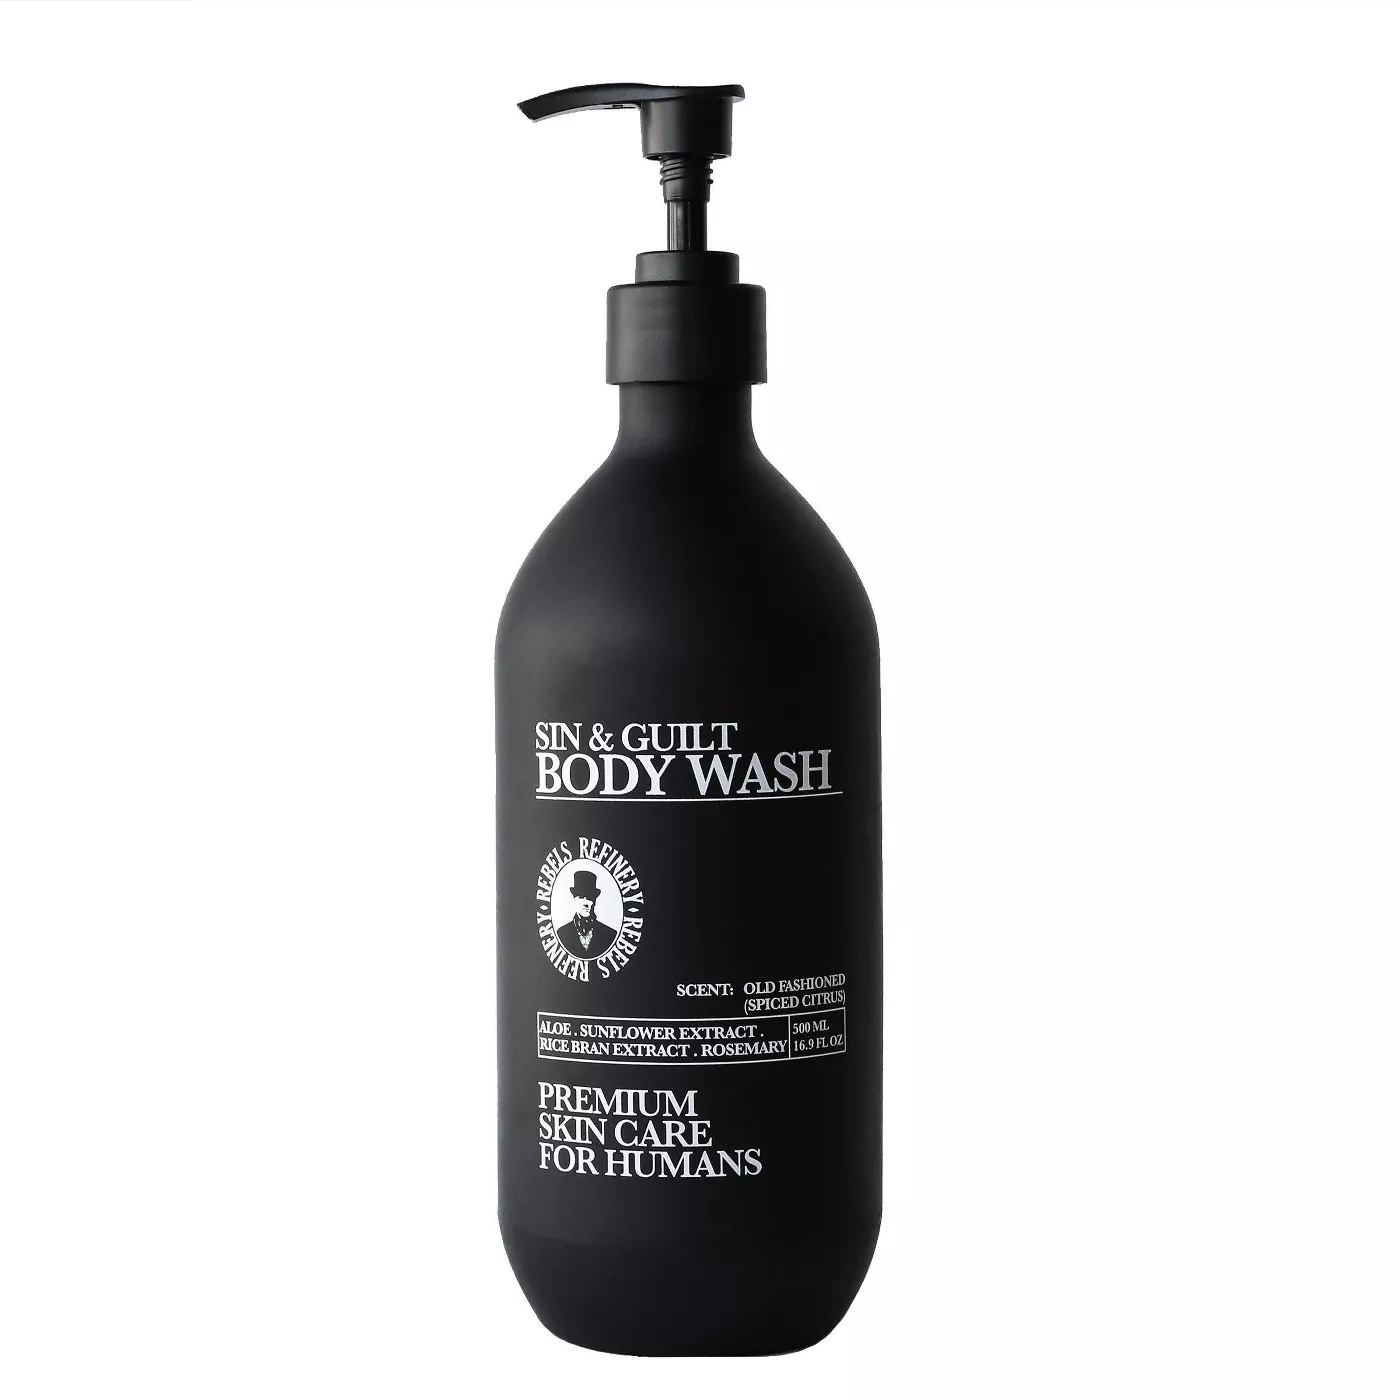 Rebels Refinery Sin & Guilt Body Wash ingredients (Explained)